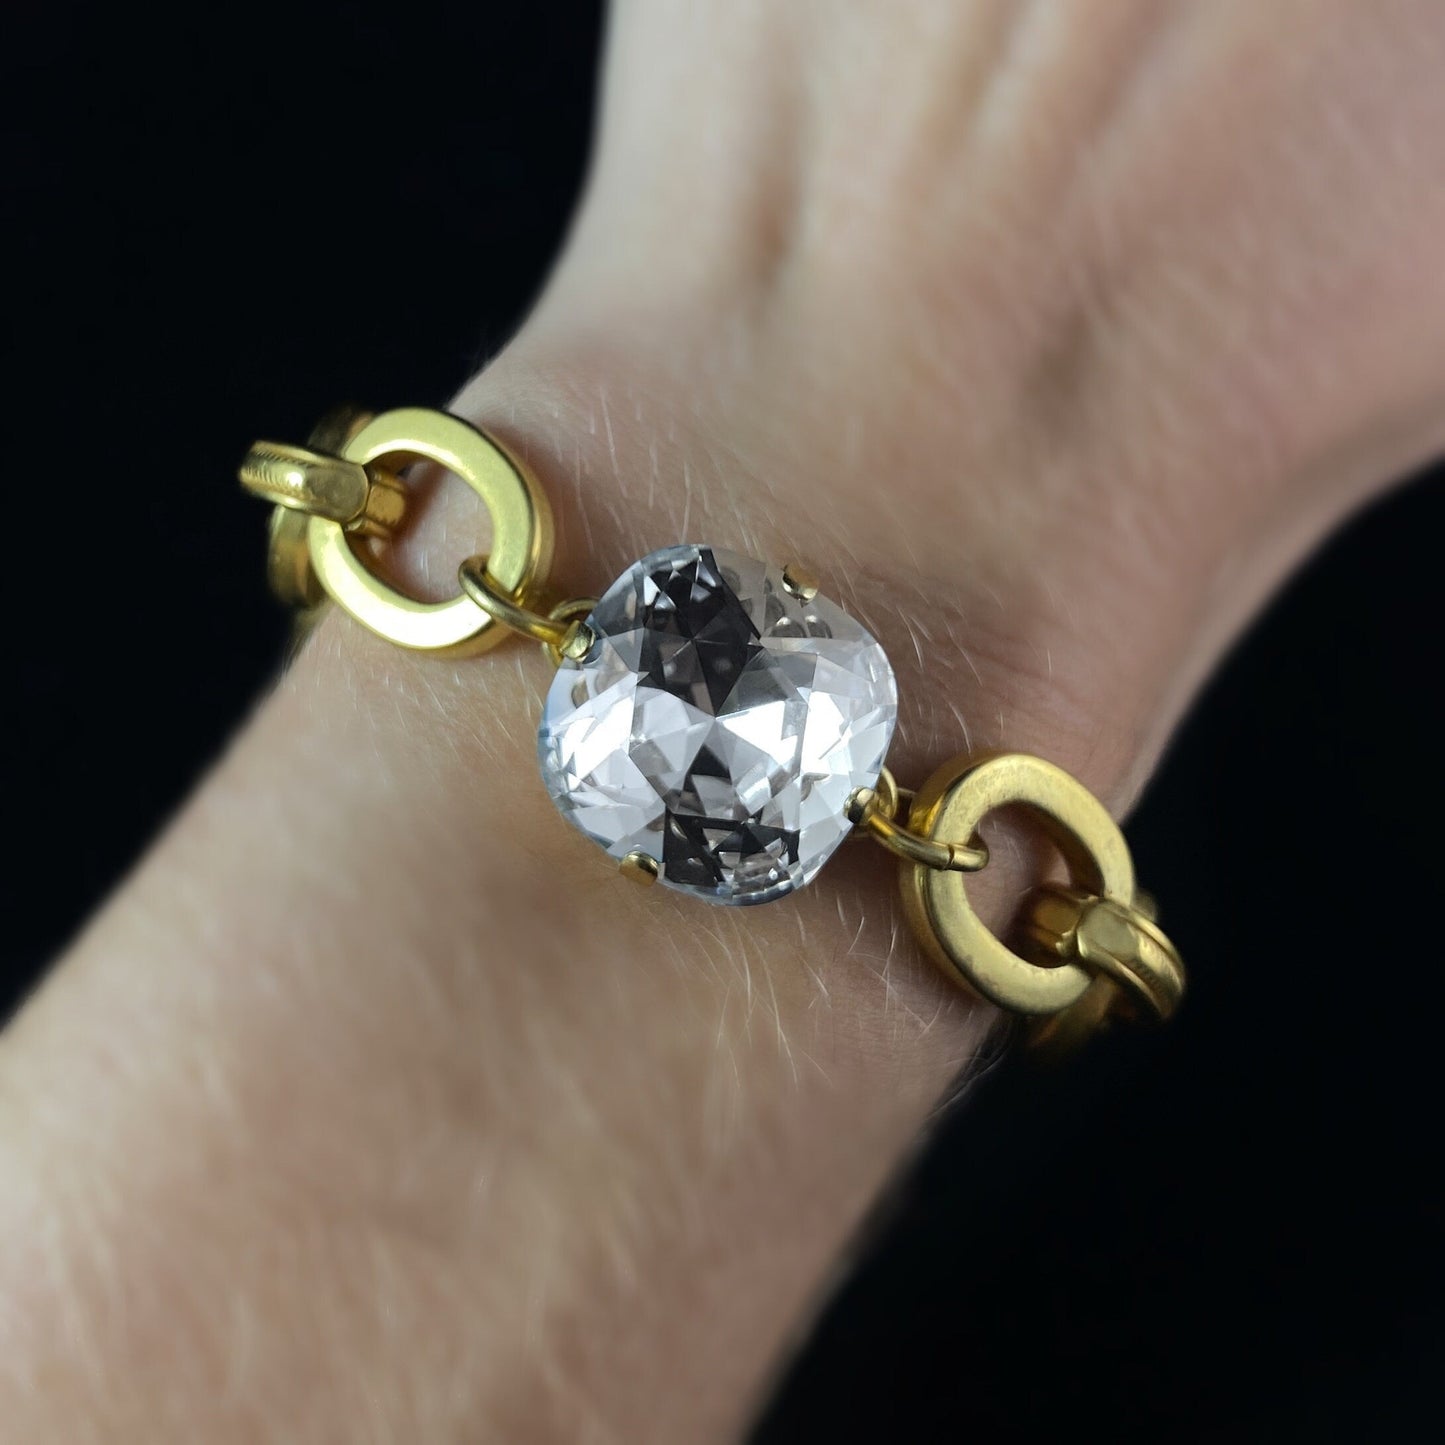 Chunky Gold Chain Bracelet with Large Cushion Cut Clear Swarovski Crystal - La Vie Parisienne by Catherine Popesco